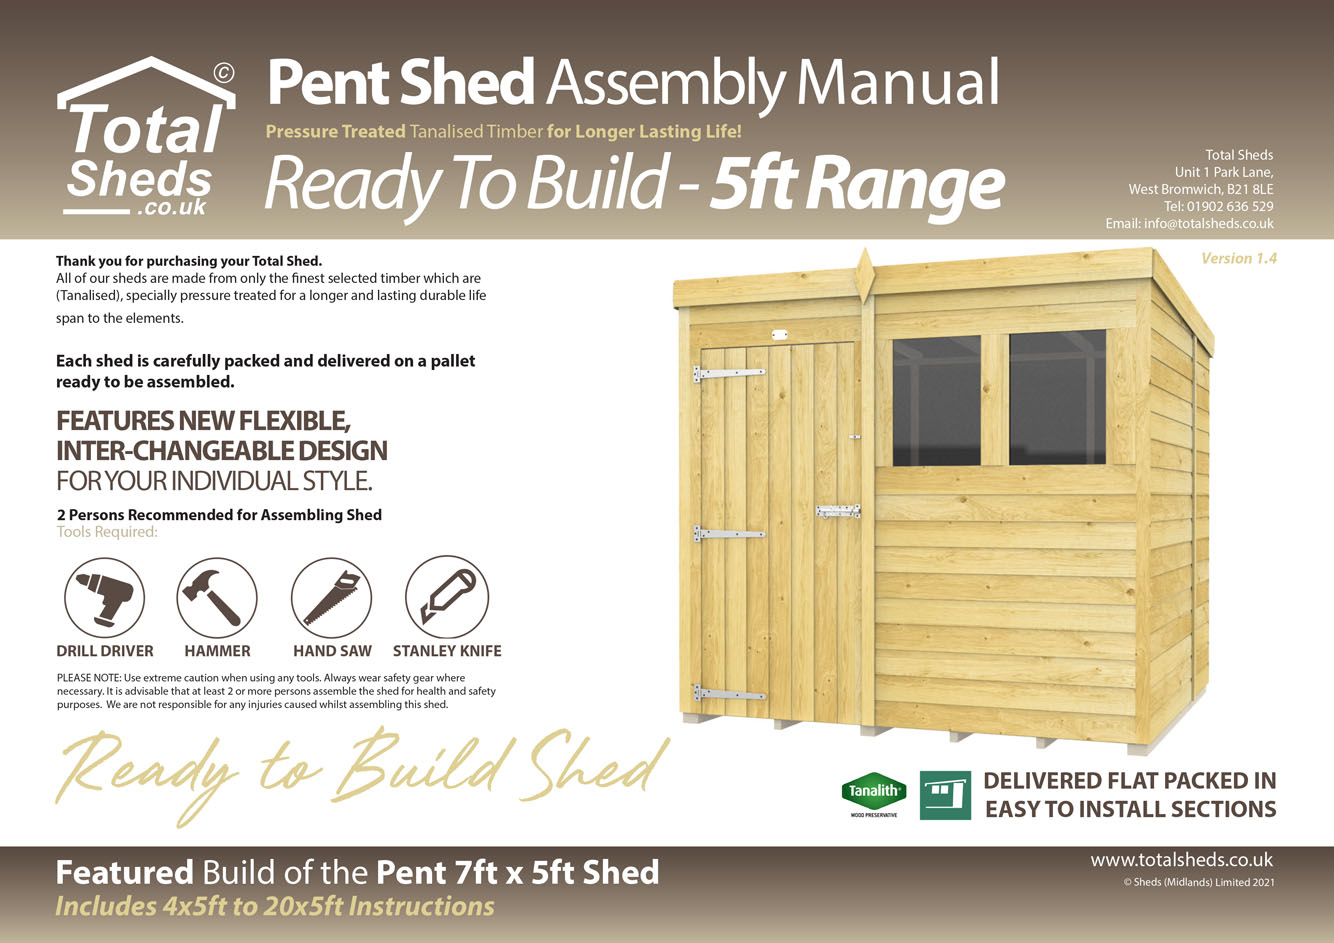 5ft Pent Shed Installation Guide